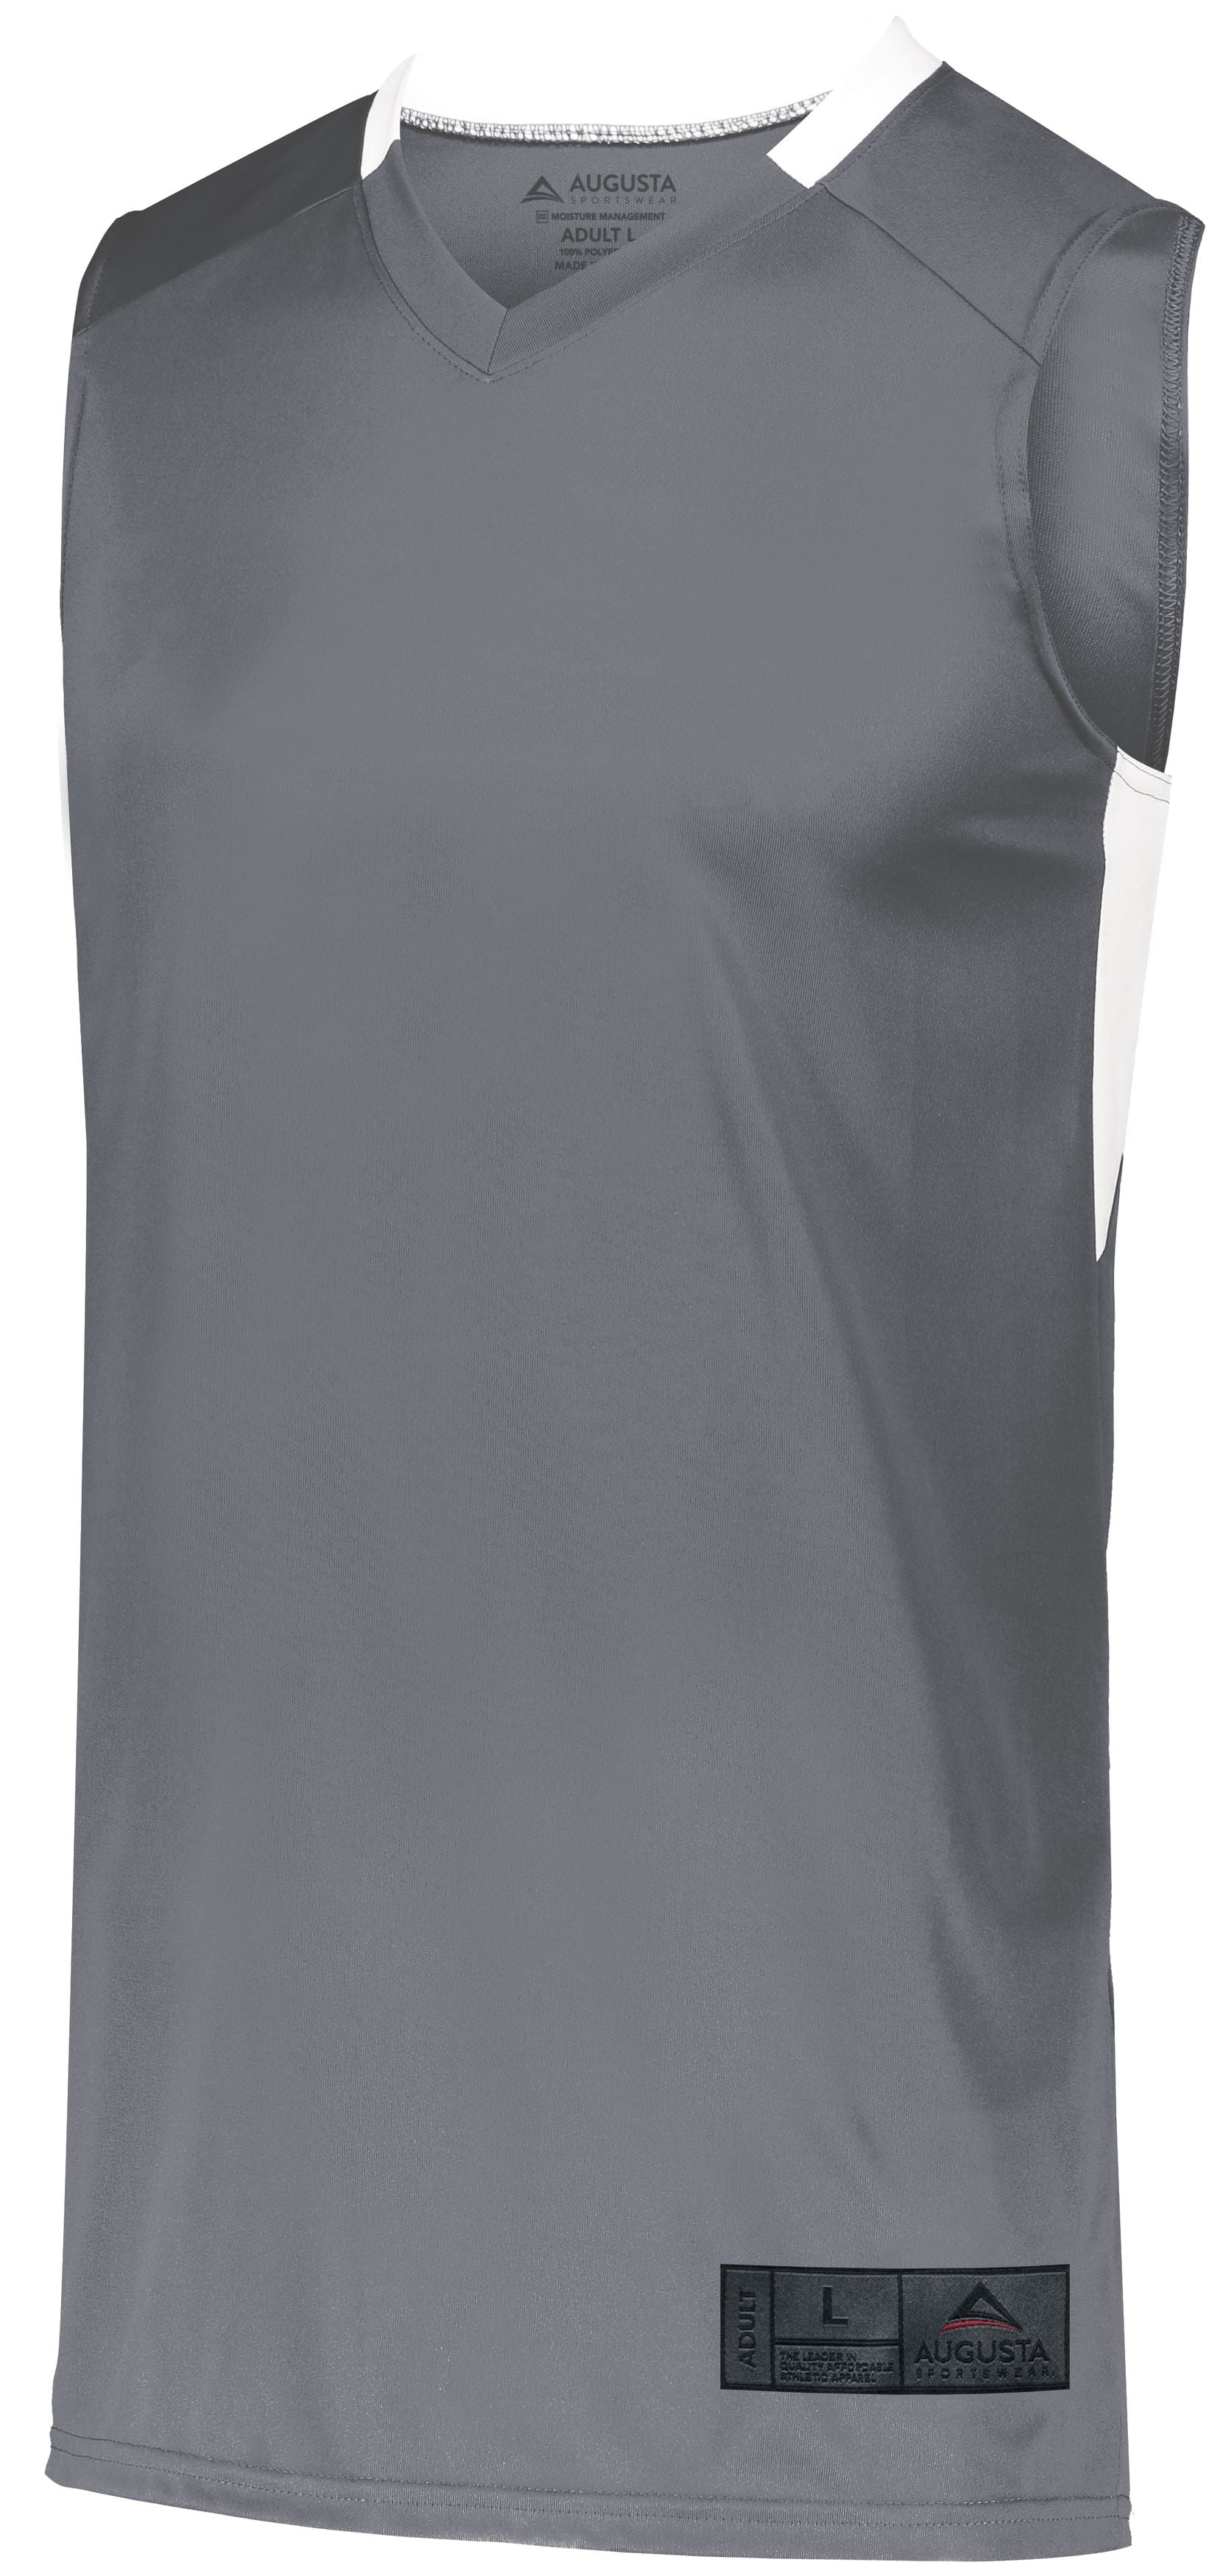 Augusta Sportswear Step-Back Basketball Jersey in Graphite/White  -Part of the Adult, Adult-Jersey, Augusta-Products, Basketball, Shirts, All-Sports, All-Sports-1 product lines at KanaleyCreations.com